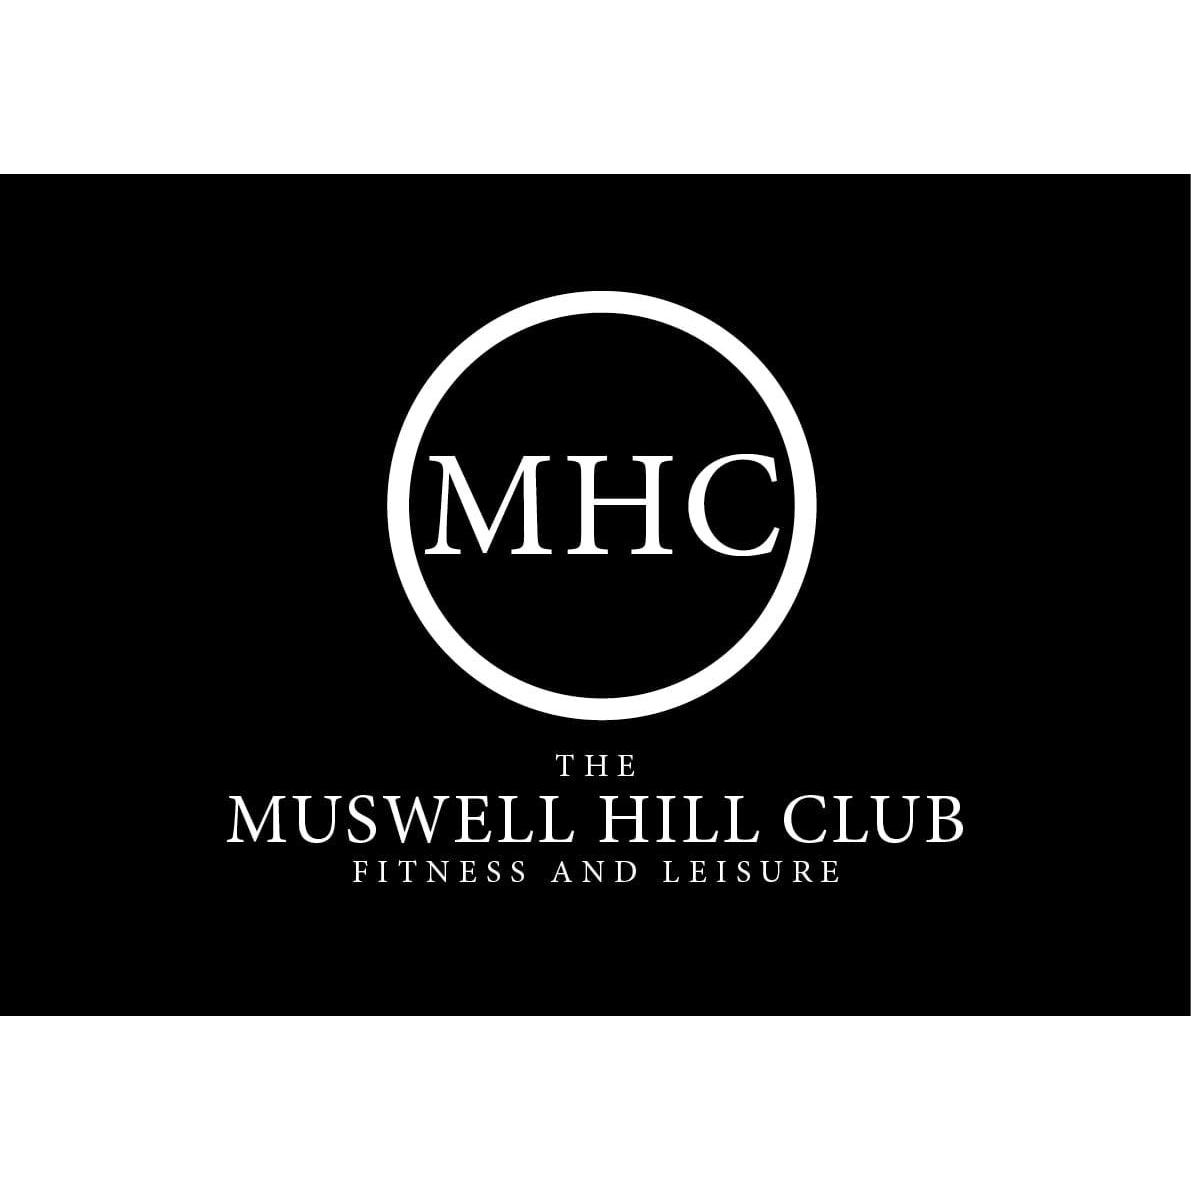 The Muswell Hill Club - London, London N10 3EF - 020 8883 0500 | ShowMeLocal.com